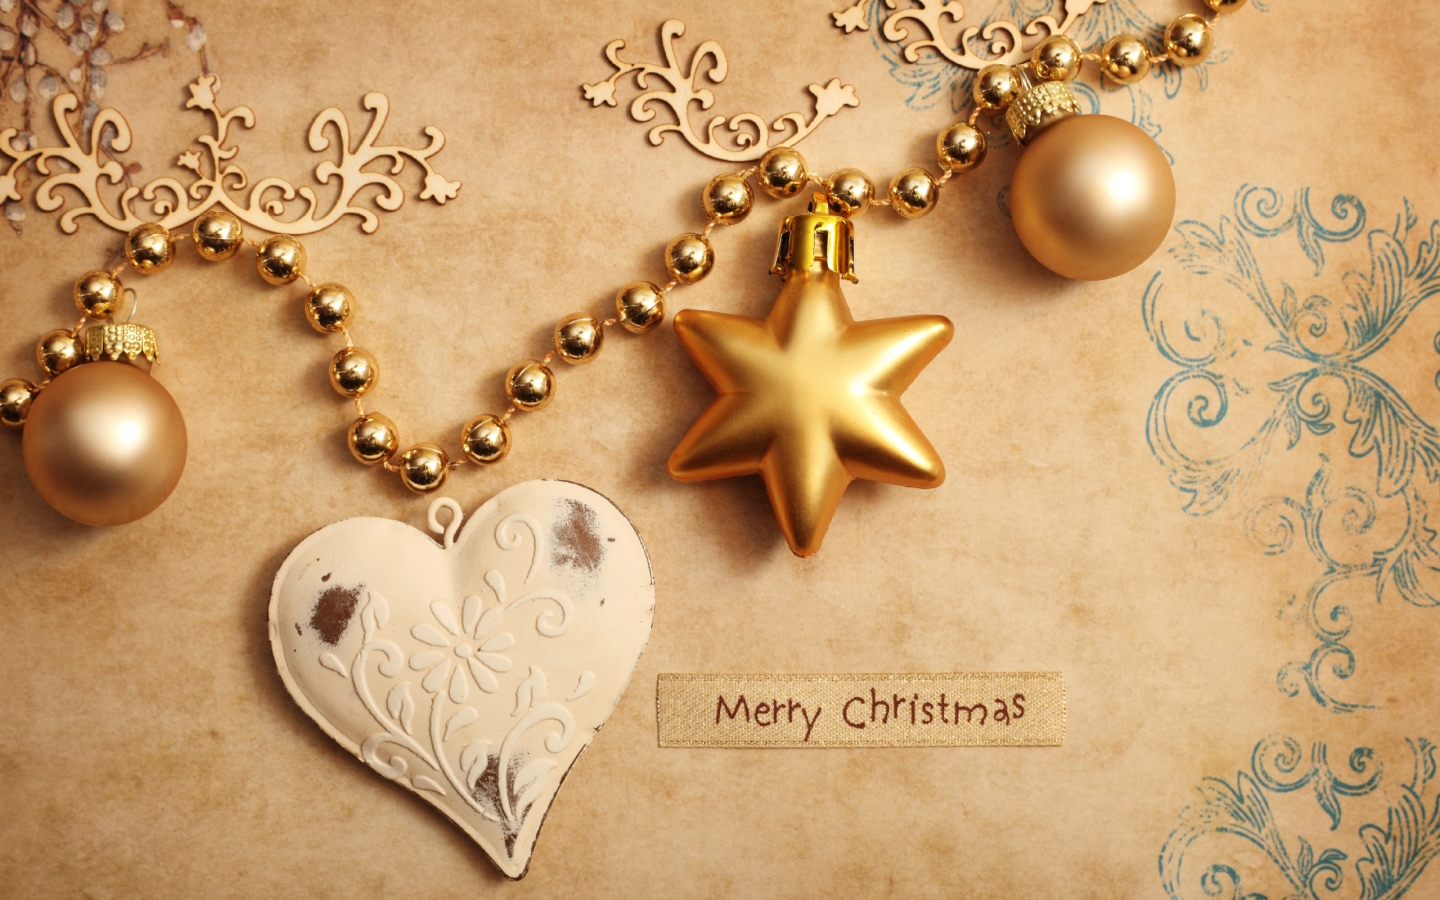 Merry Christmas Card for 1440 x 900 widescreen resolution